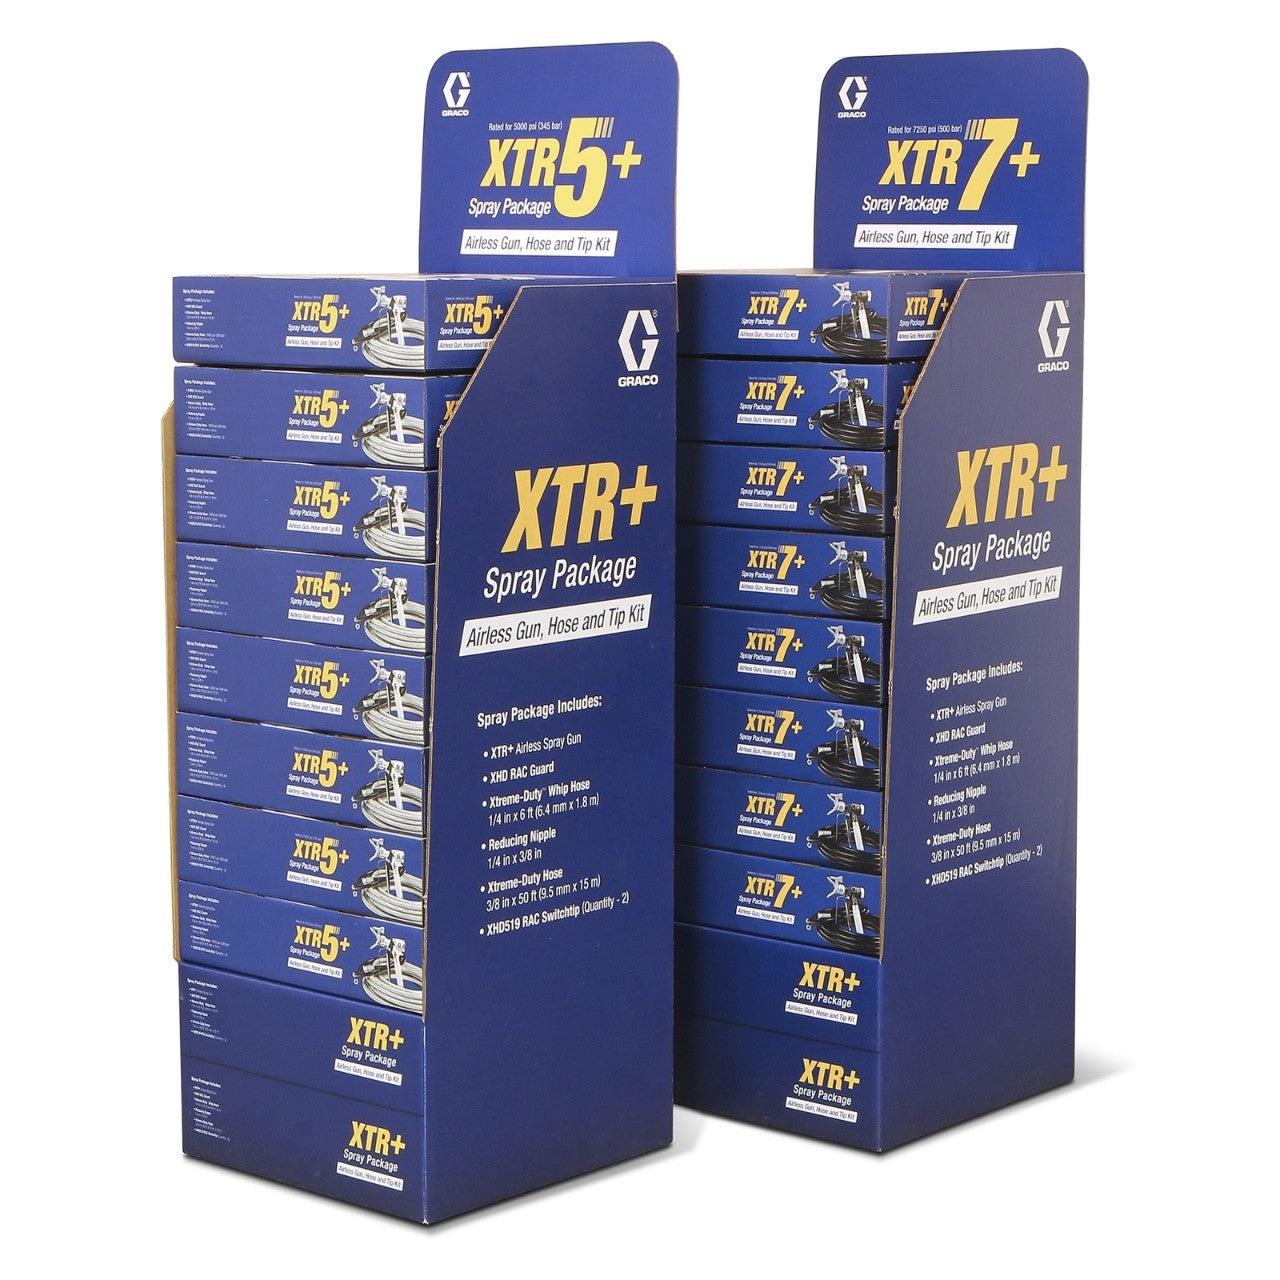 XTR5+ Gun, Hose and Tip Kit, 8-pack of 273142 with Display Stand